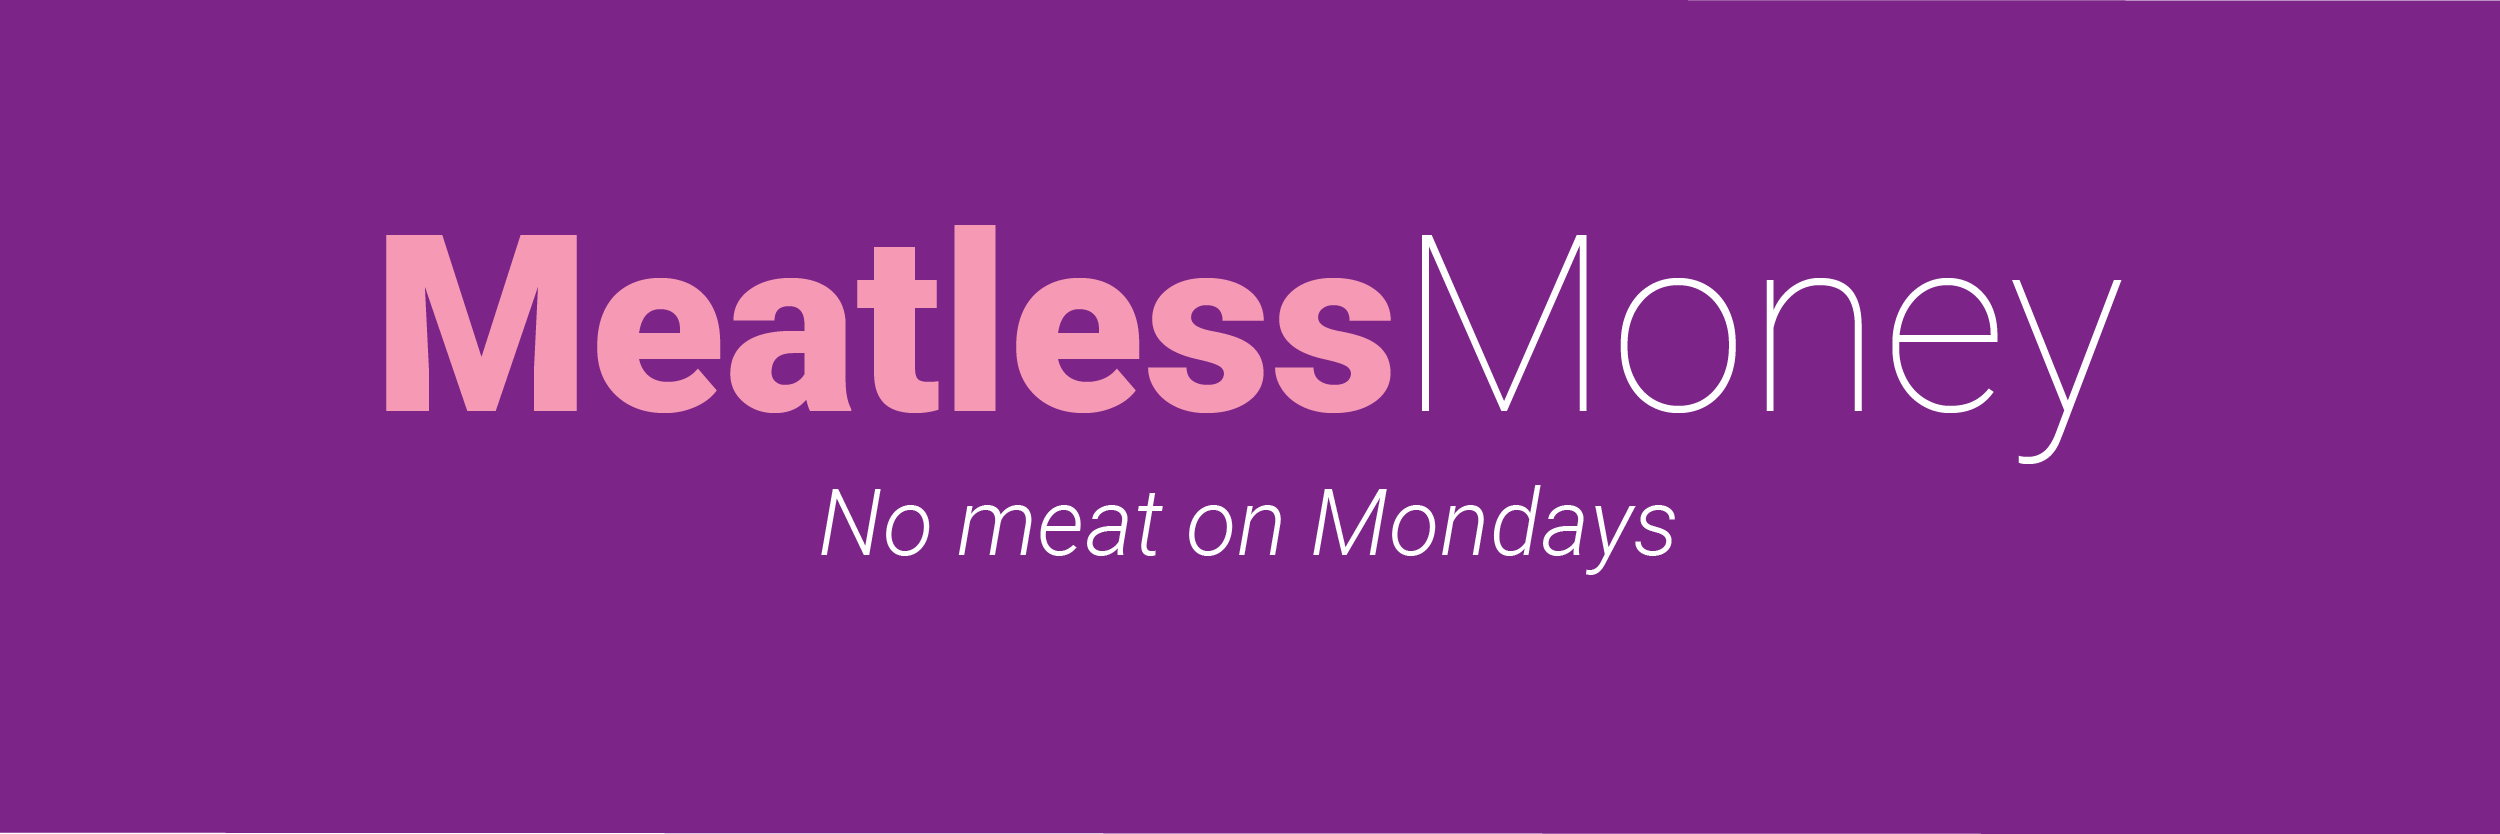 Meatless Monday-01-2